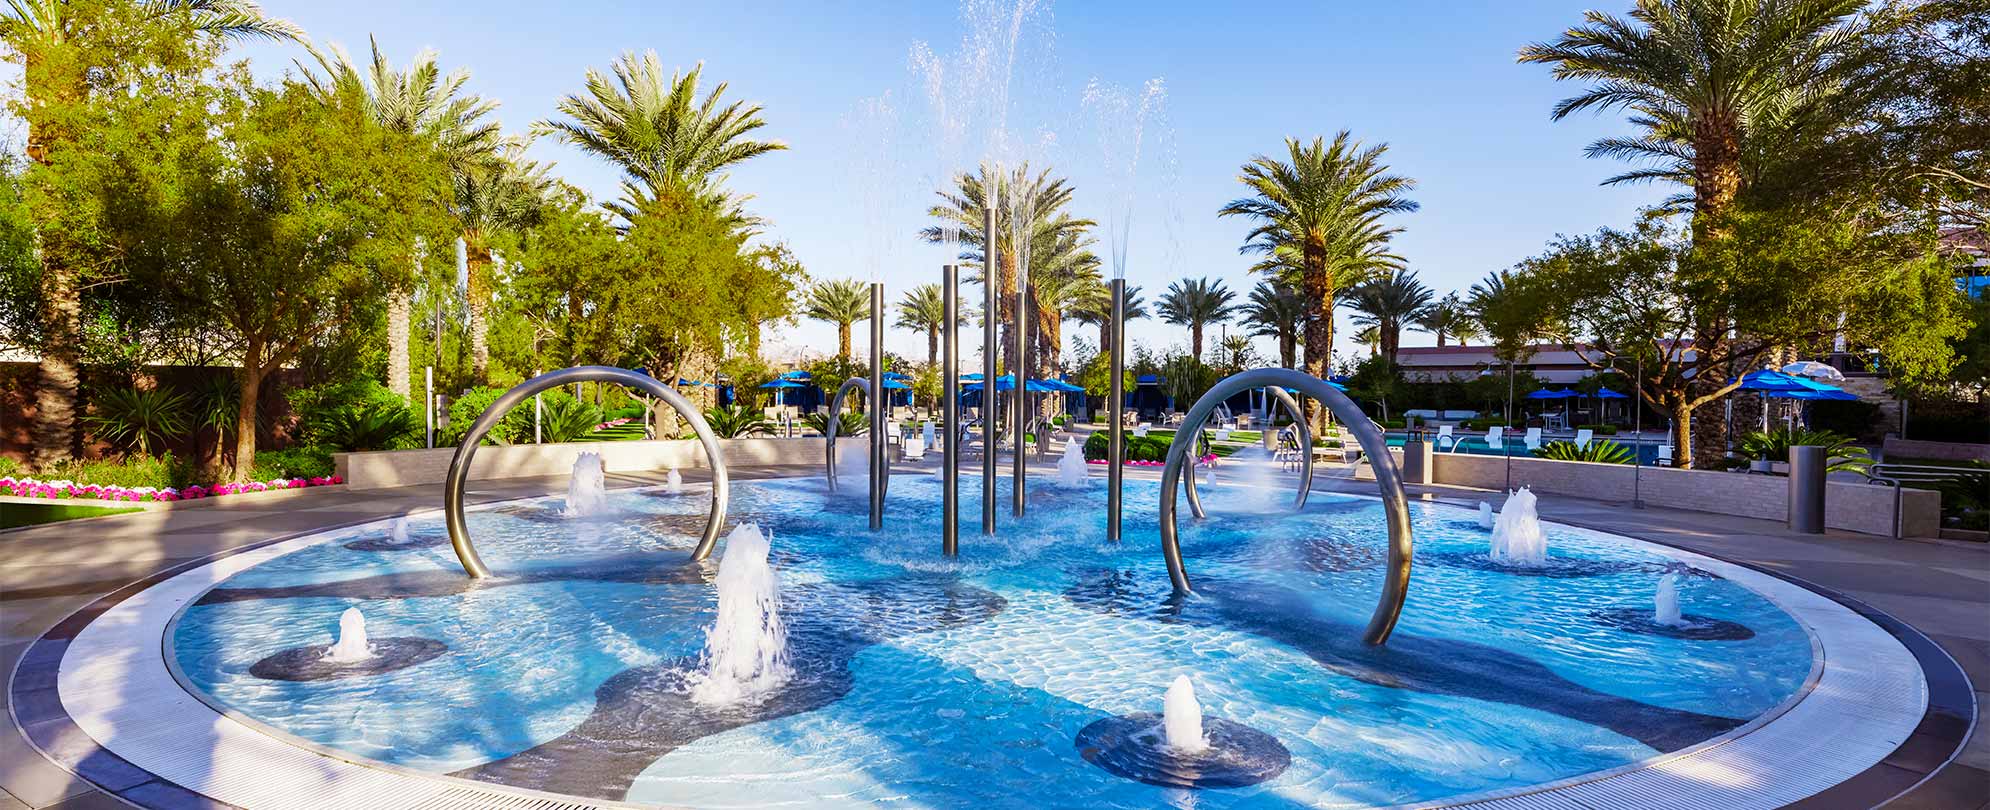 A large fountain pool surrounded by palm trees at Margaritaville Vacation Club by Wyndham - Desert Blue in Las Vegas, NV